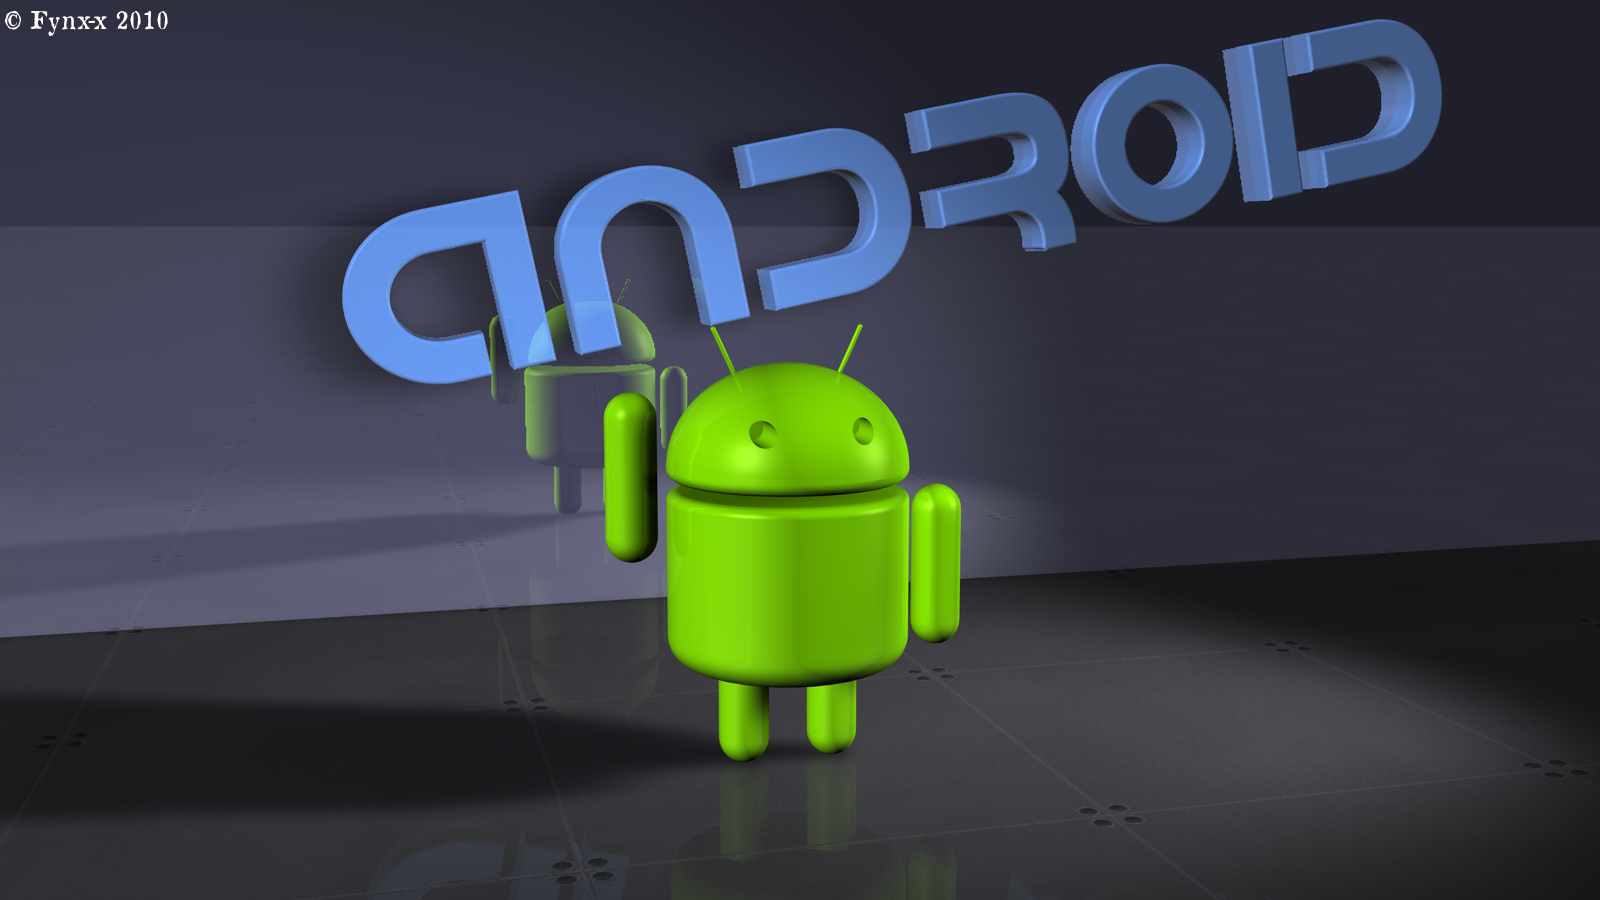 Android Design Wallpapers free download for all mobiles ~ Hacker